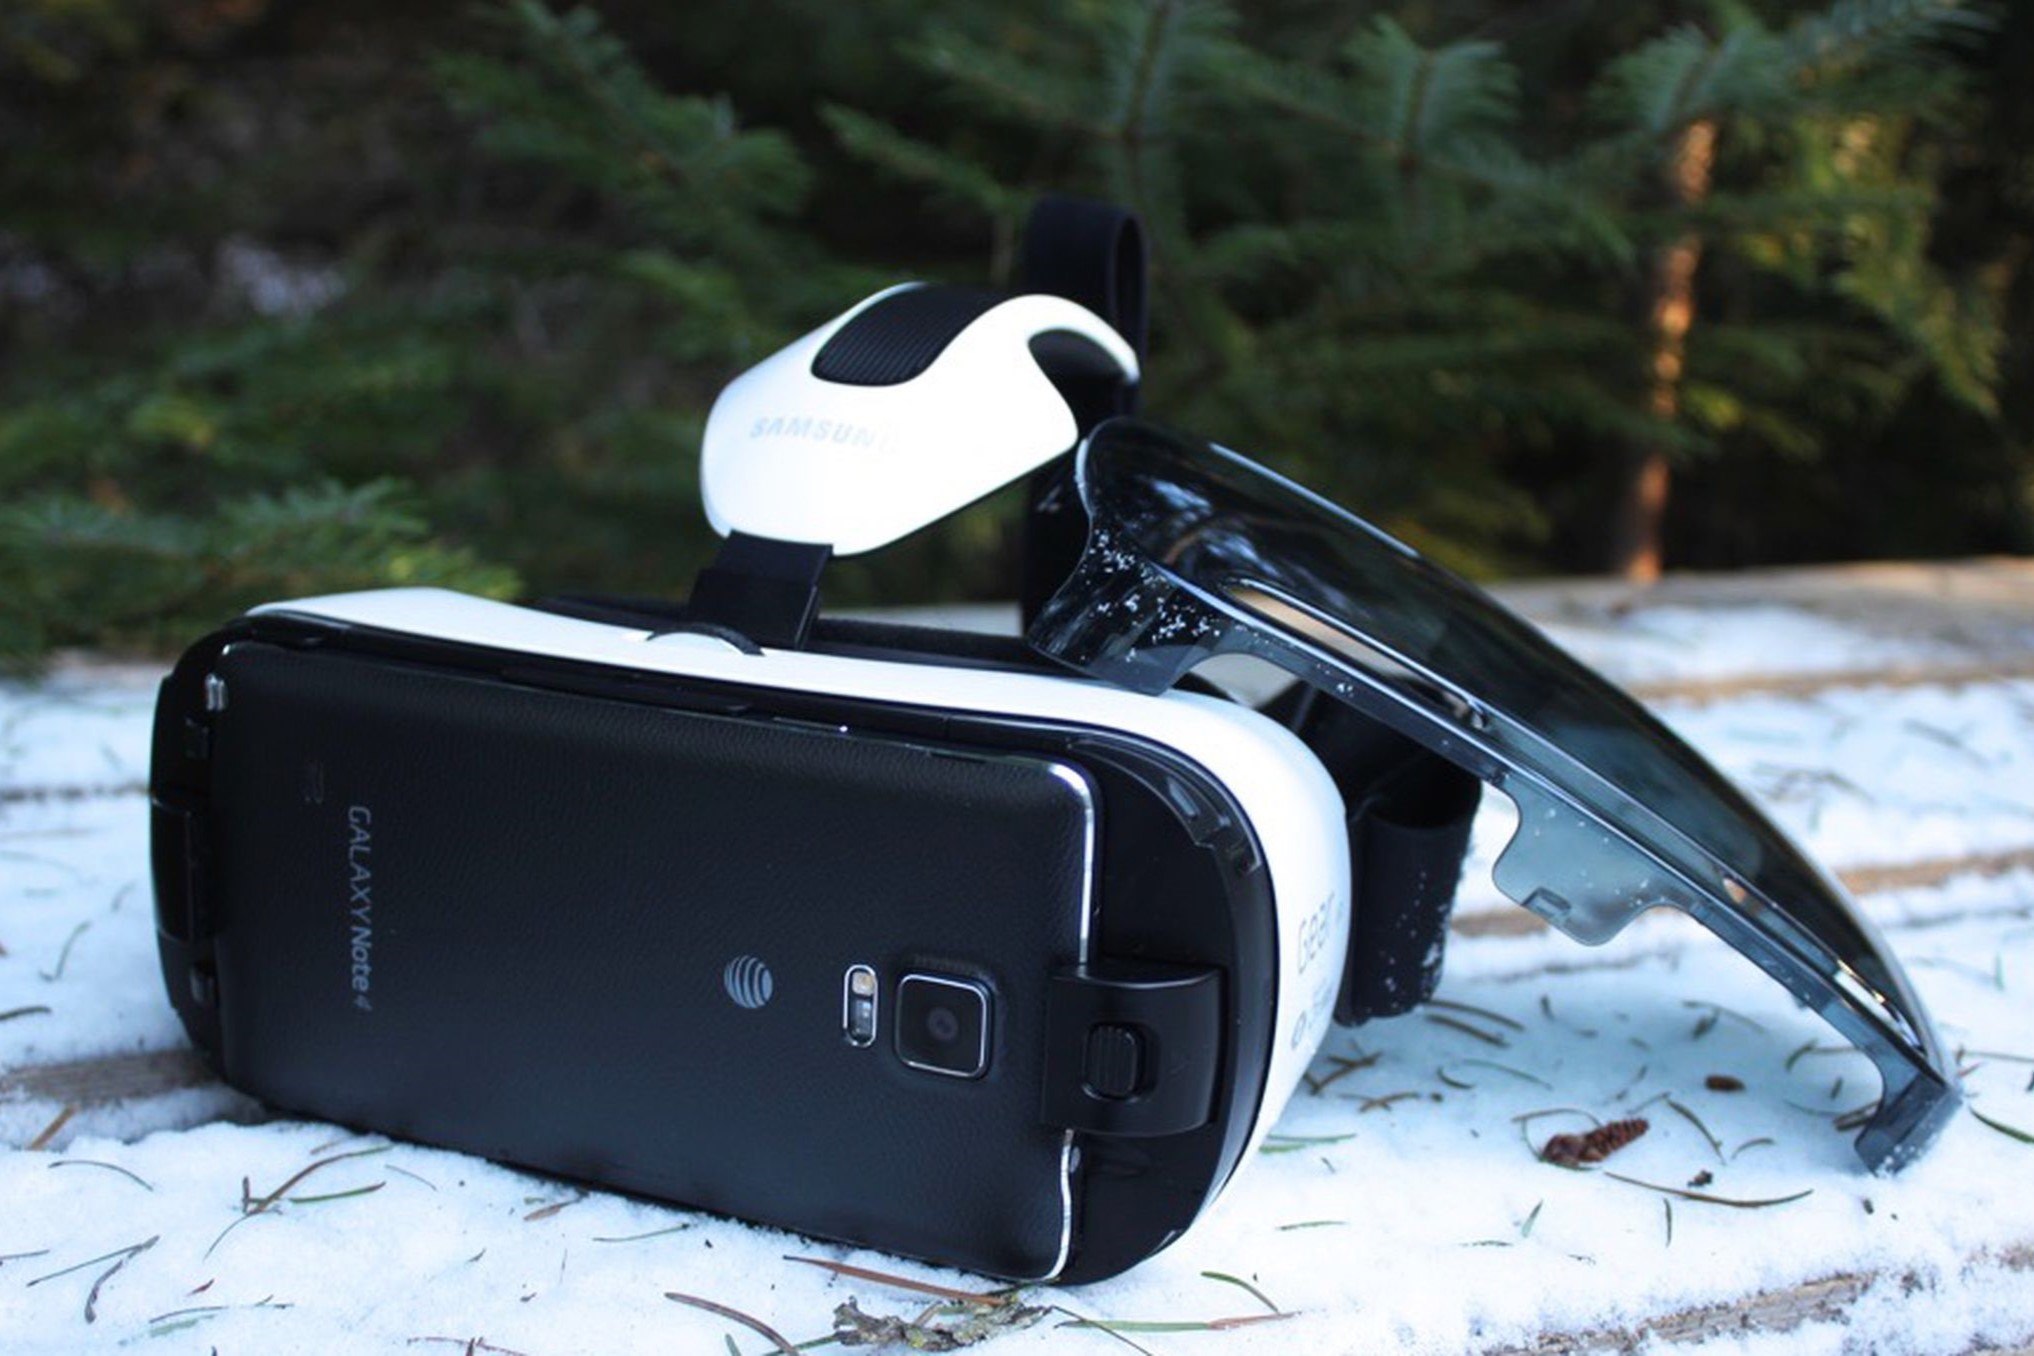 What To Do When Your Samsung Galaxy Won’t Get Off The Oculus Rift Mode